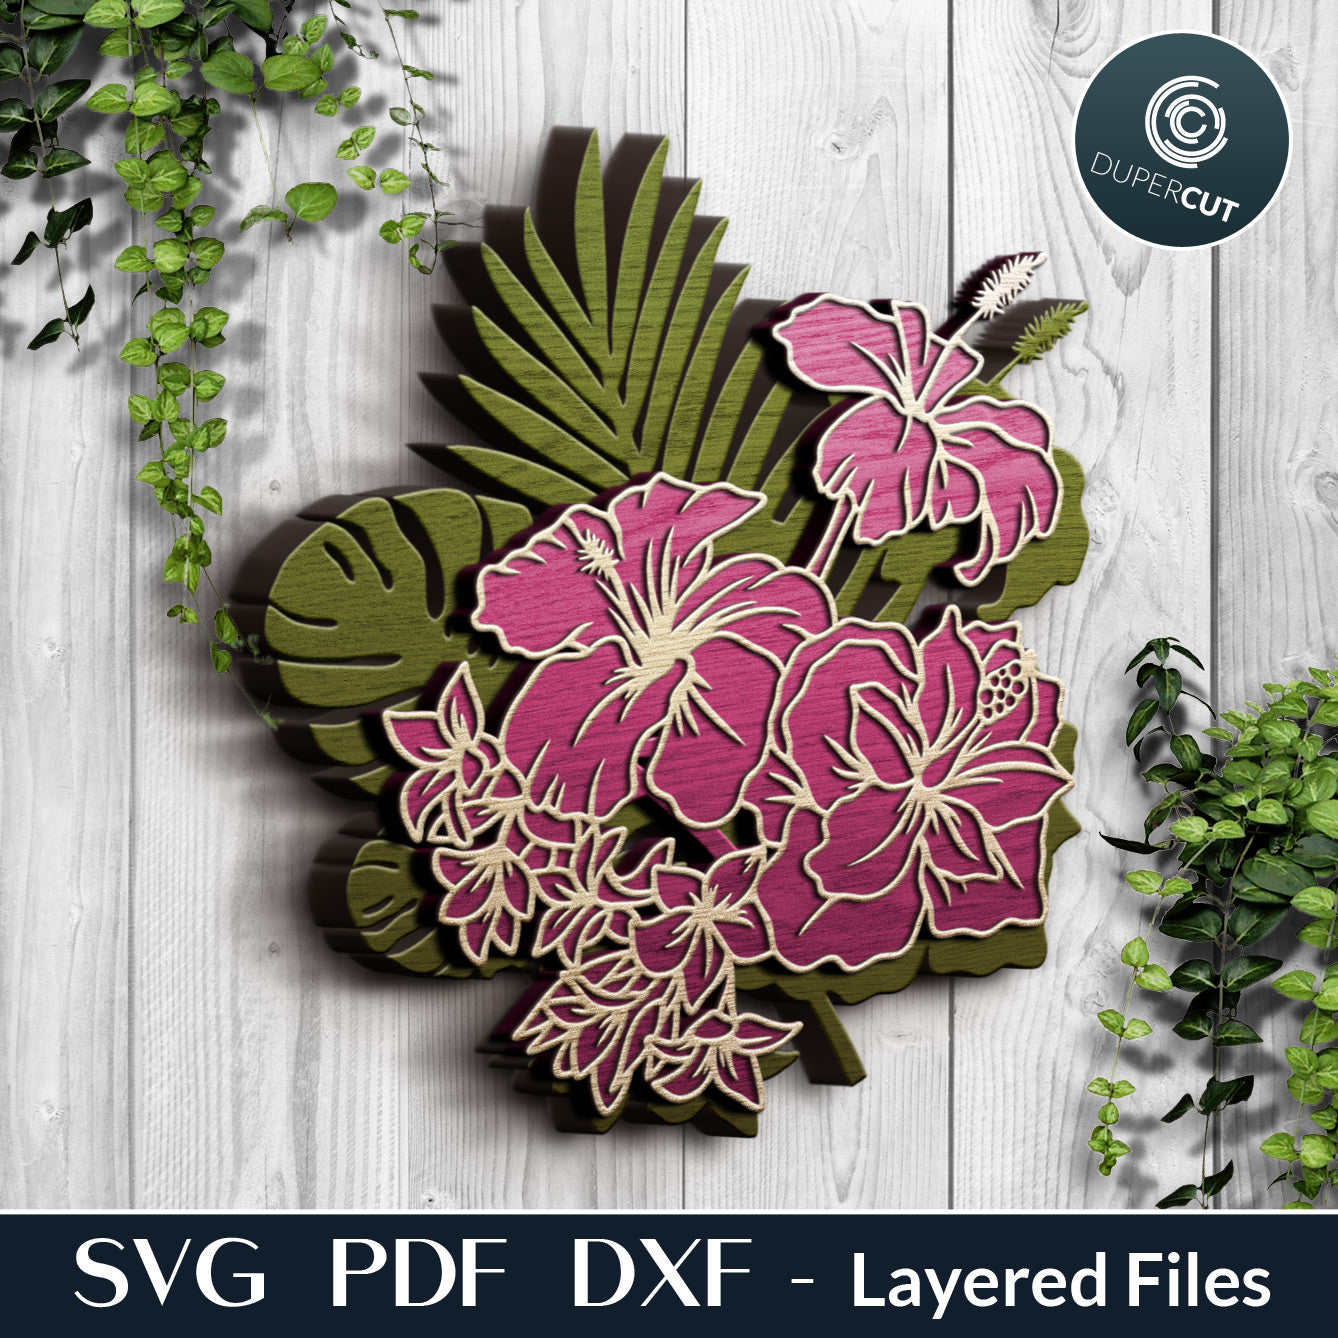 Tropical flower bouquet - layered cut files by DuperCut - SVG PDF DXF vector template for Glowforge, laser cutting machines, engraving, Cricut, Silhouette cameo